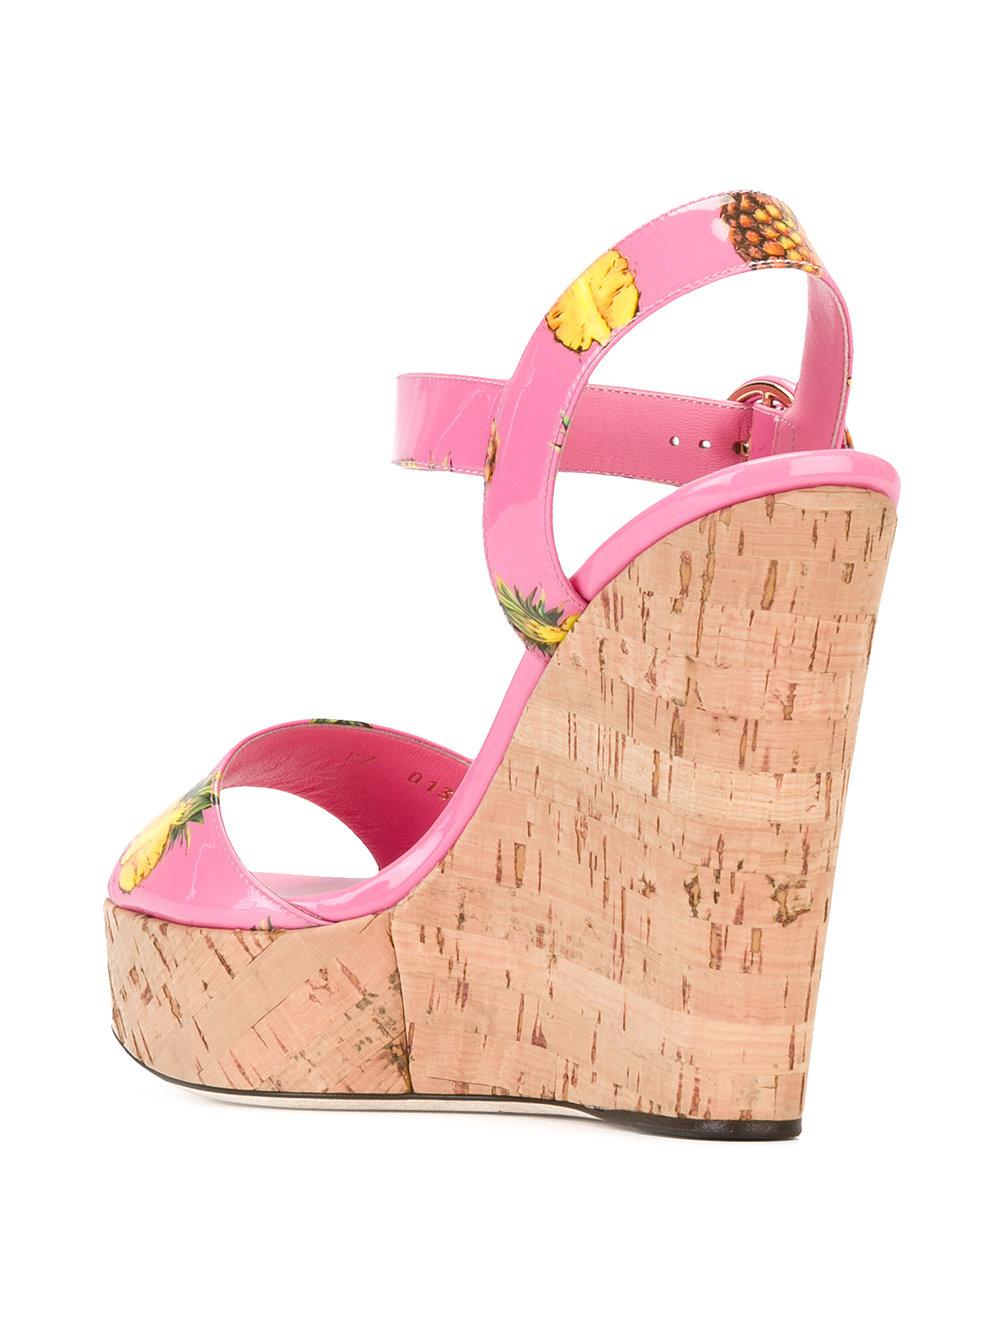 Dolce & Gabbana Pineapple Print Wedge Sandals in Pink | Lyst